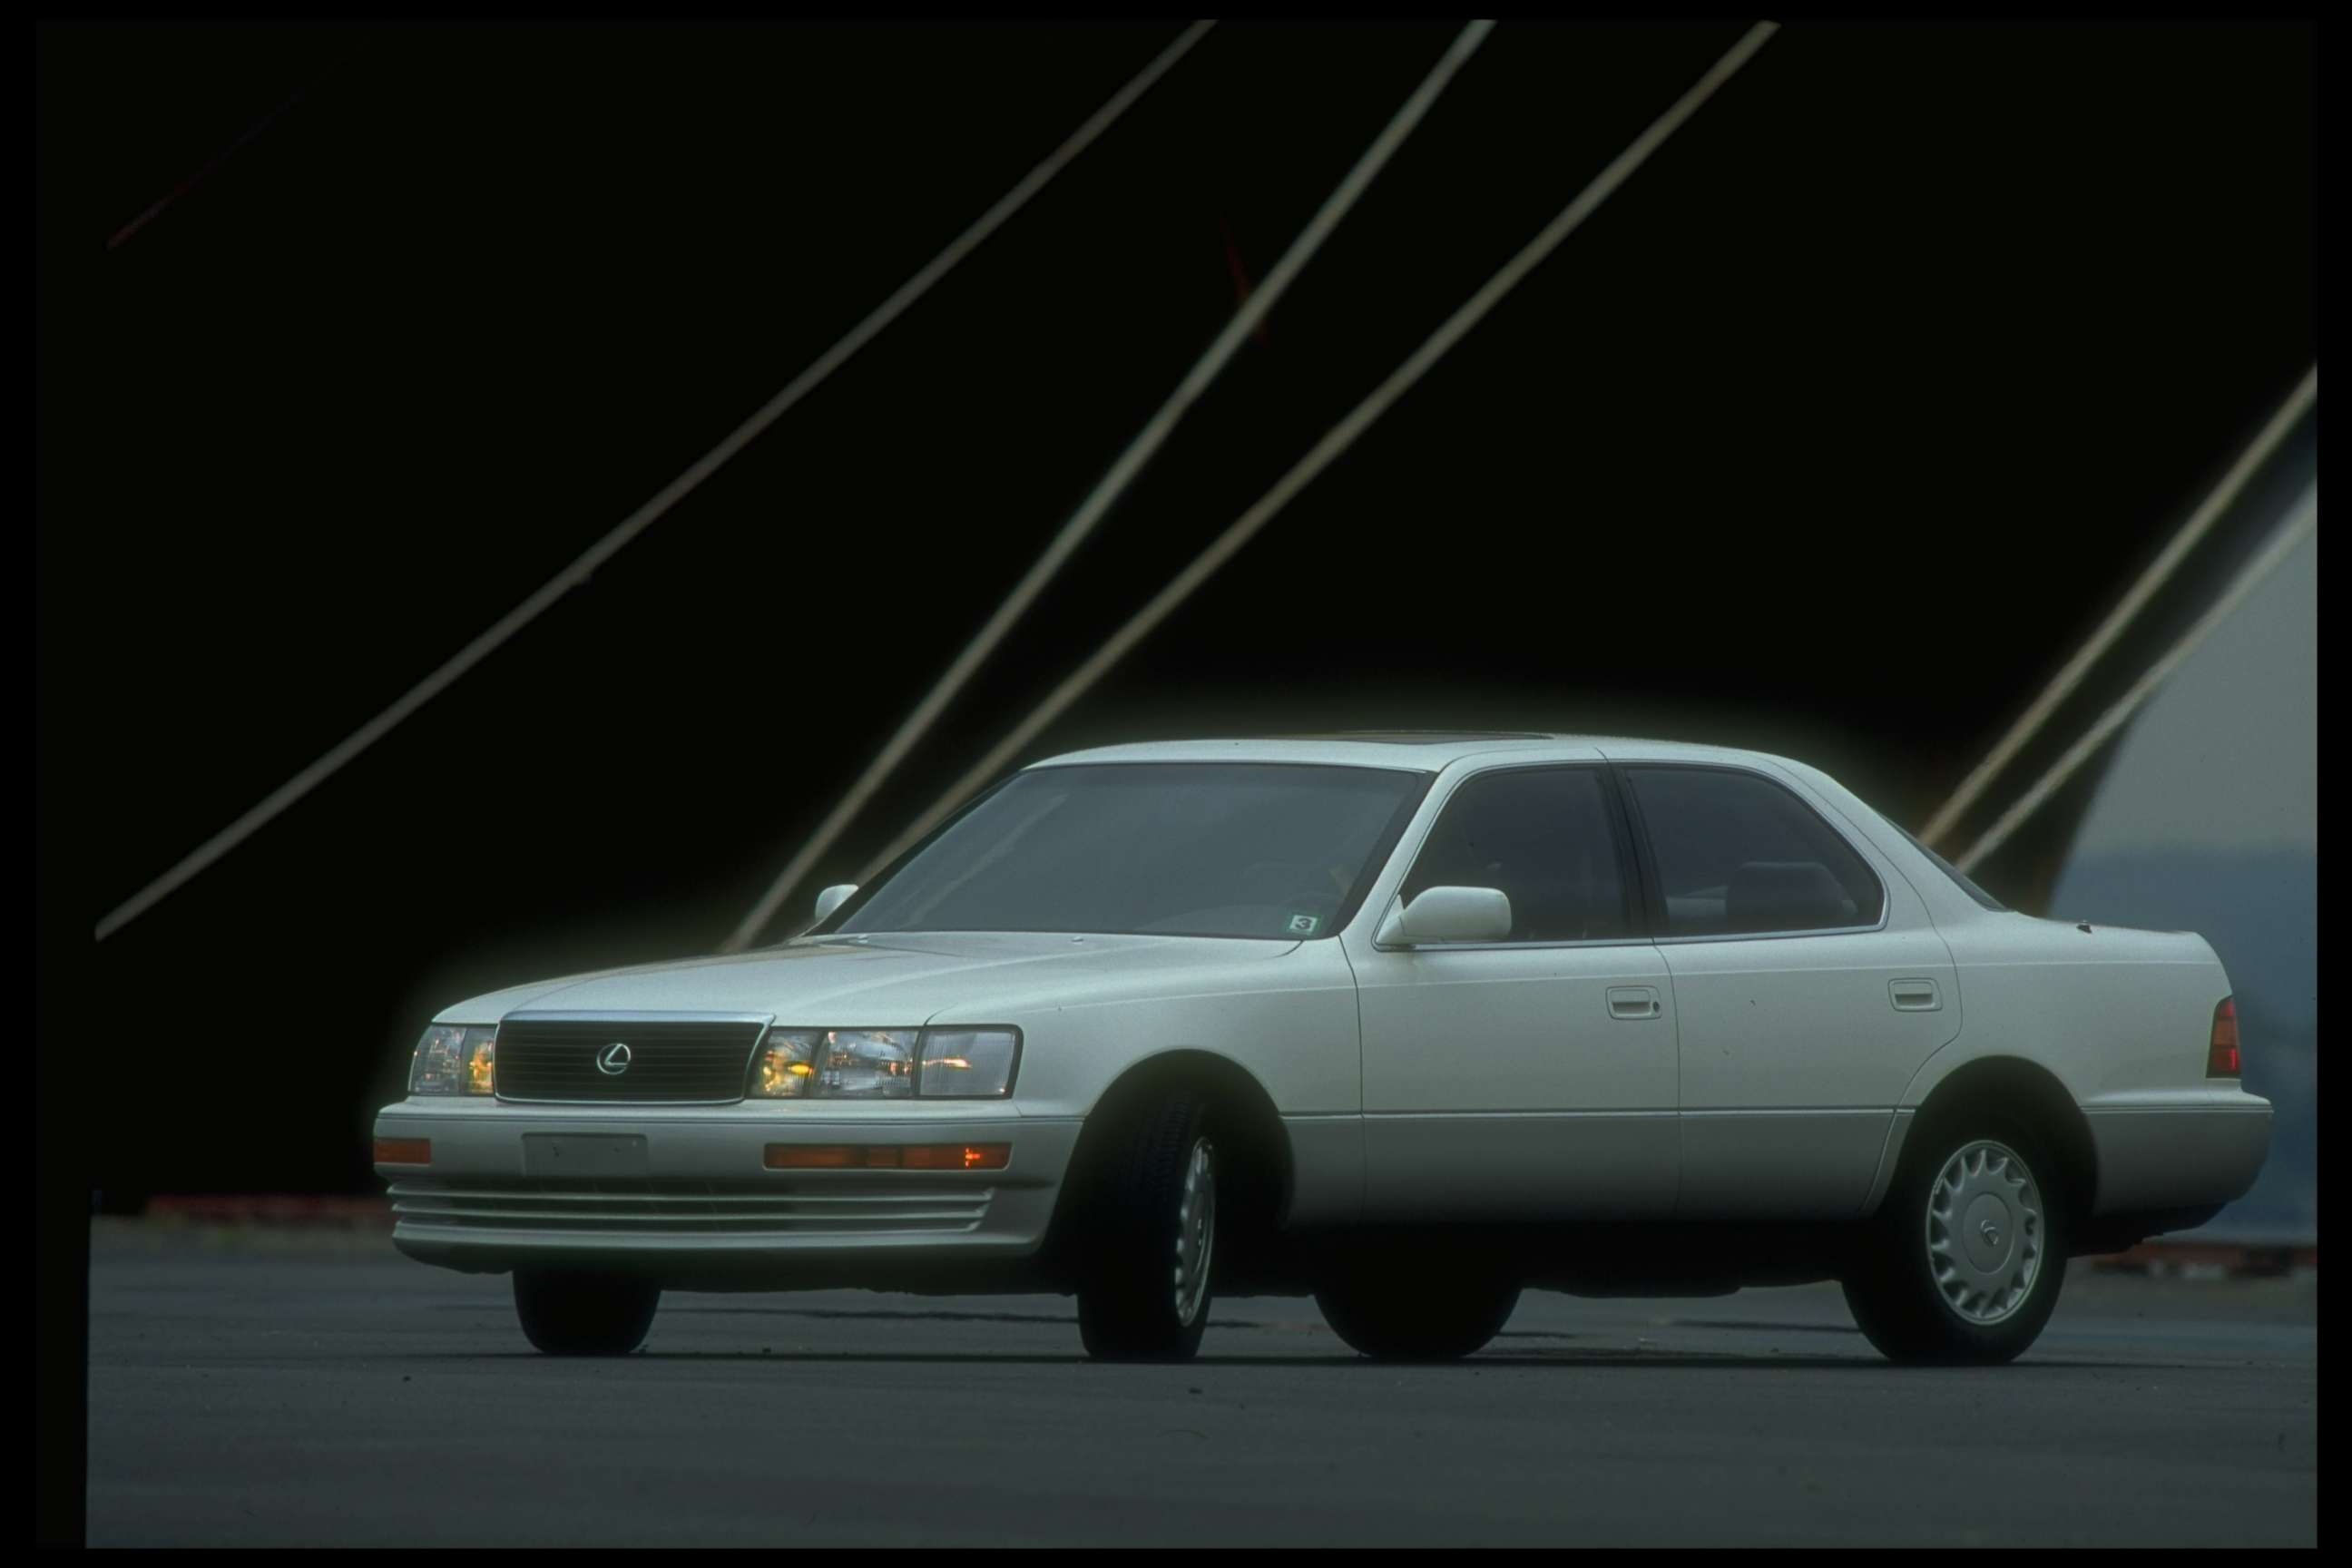 PHOTO: The LS400 was one of the first Lexus cars to hit the U.S. market. It originally debuted in 1990.